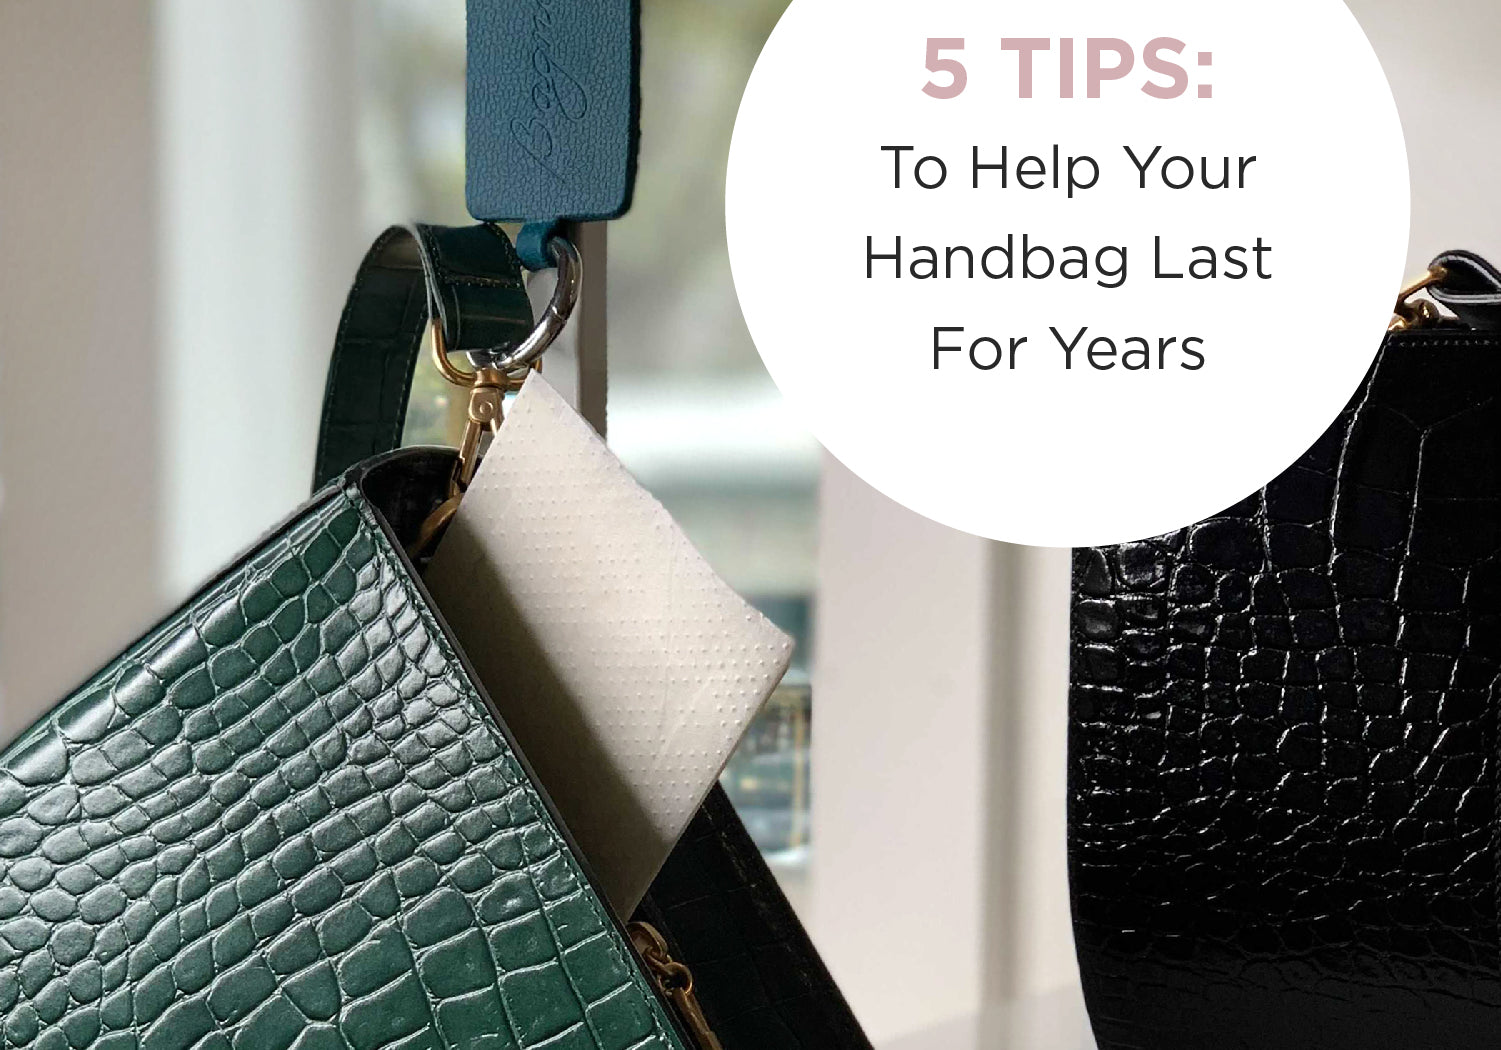 5 Tips To Help Your Handbag Last For Years